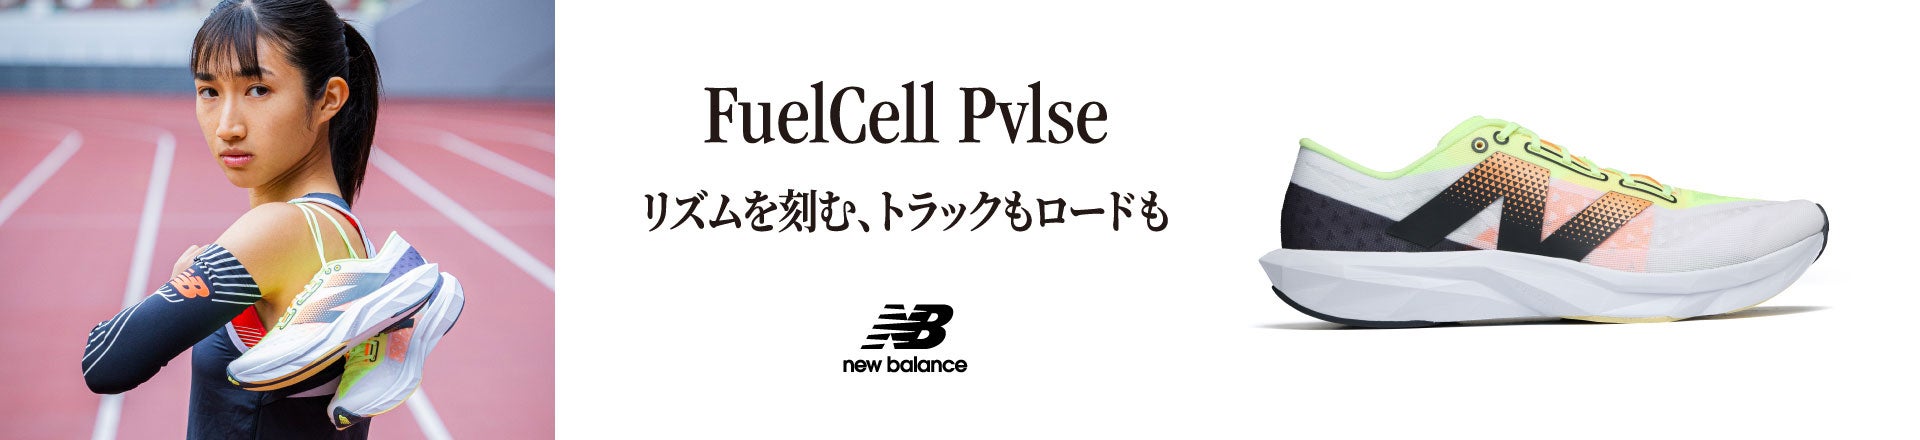 FuelCell pvlse